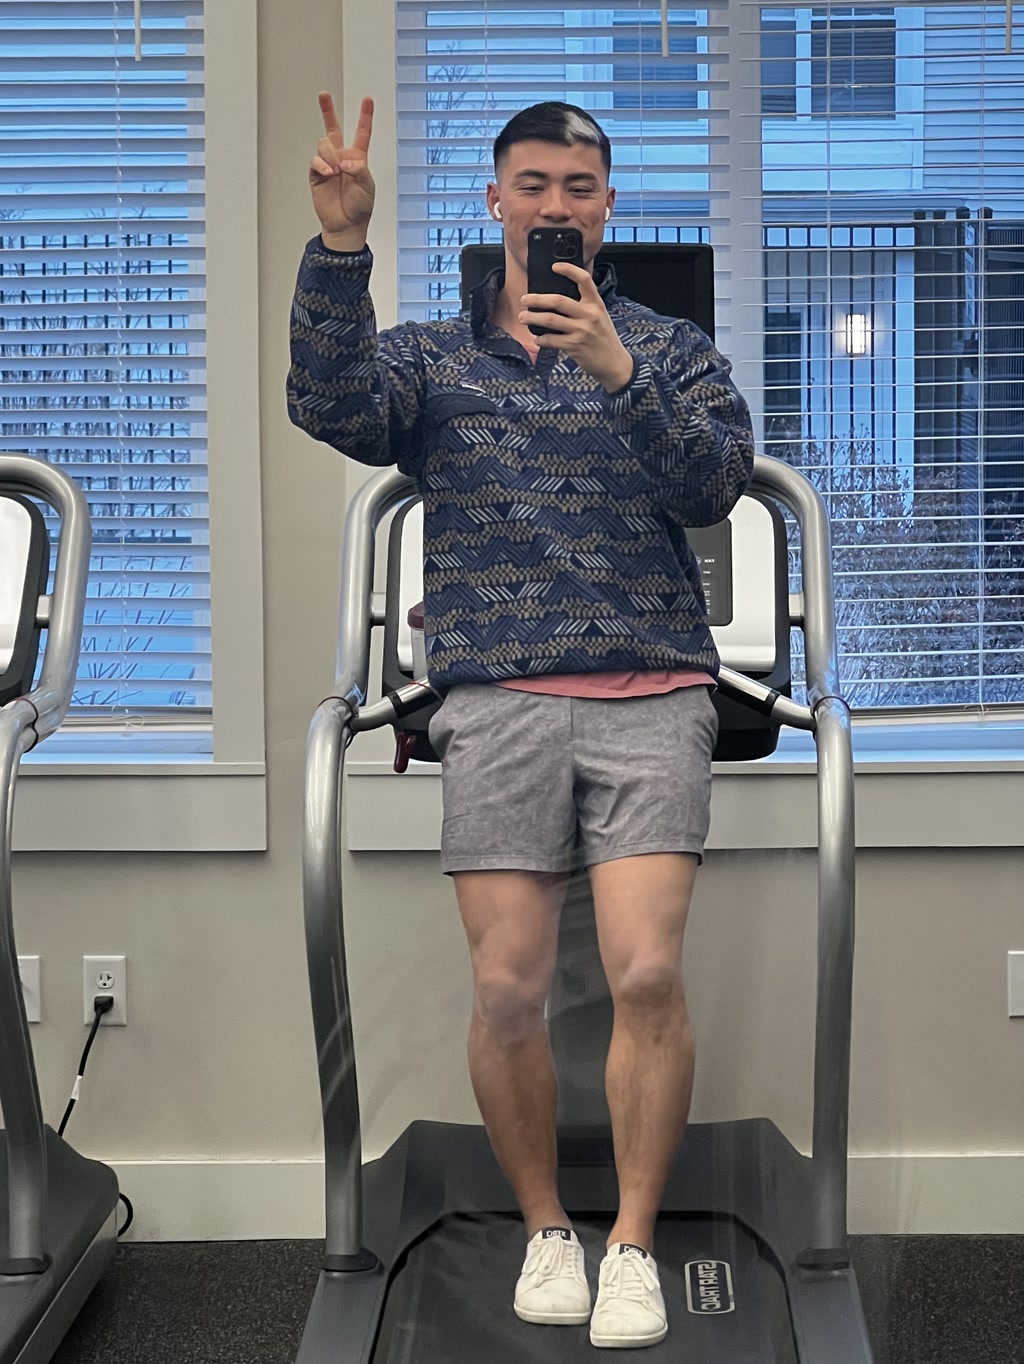 A person is standing on a treadmill, holding a phone in their right hand to take a mirror selfie. The individual is wearing a patterned long-sleeved sweater, gray shorts, and white sneakers. They are making a peace sign with their left hand raised next to their face. The background indicates an indoor setting with exercise equipment, a window with blinds, and the reflection of some furniture. The lighting is bright inside the room.